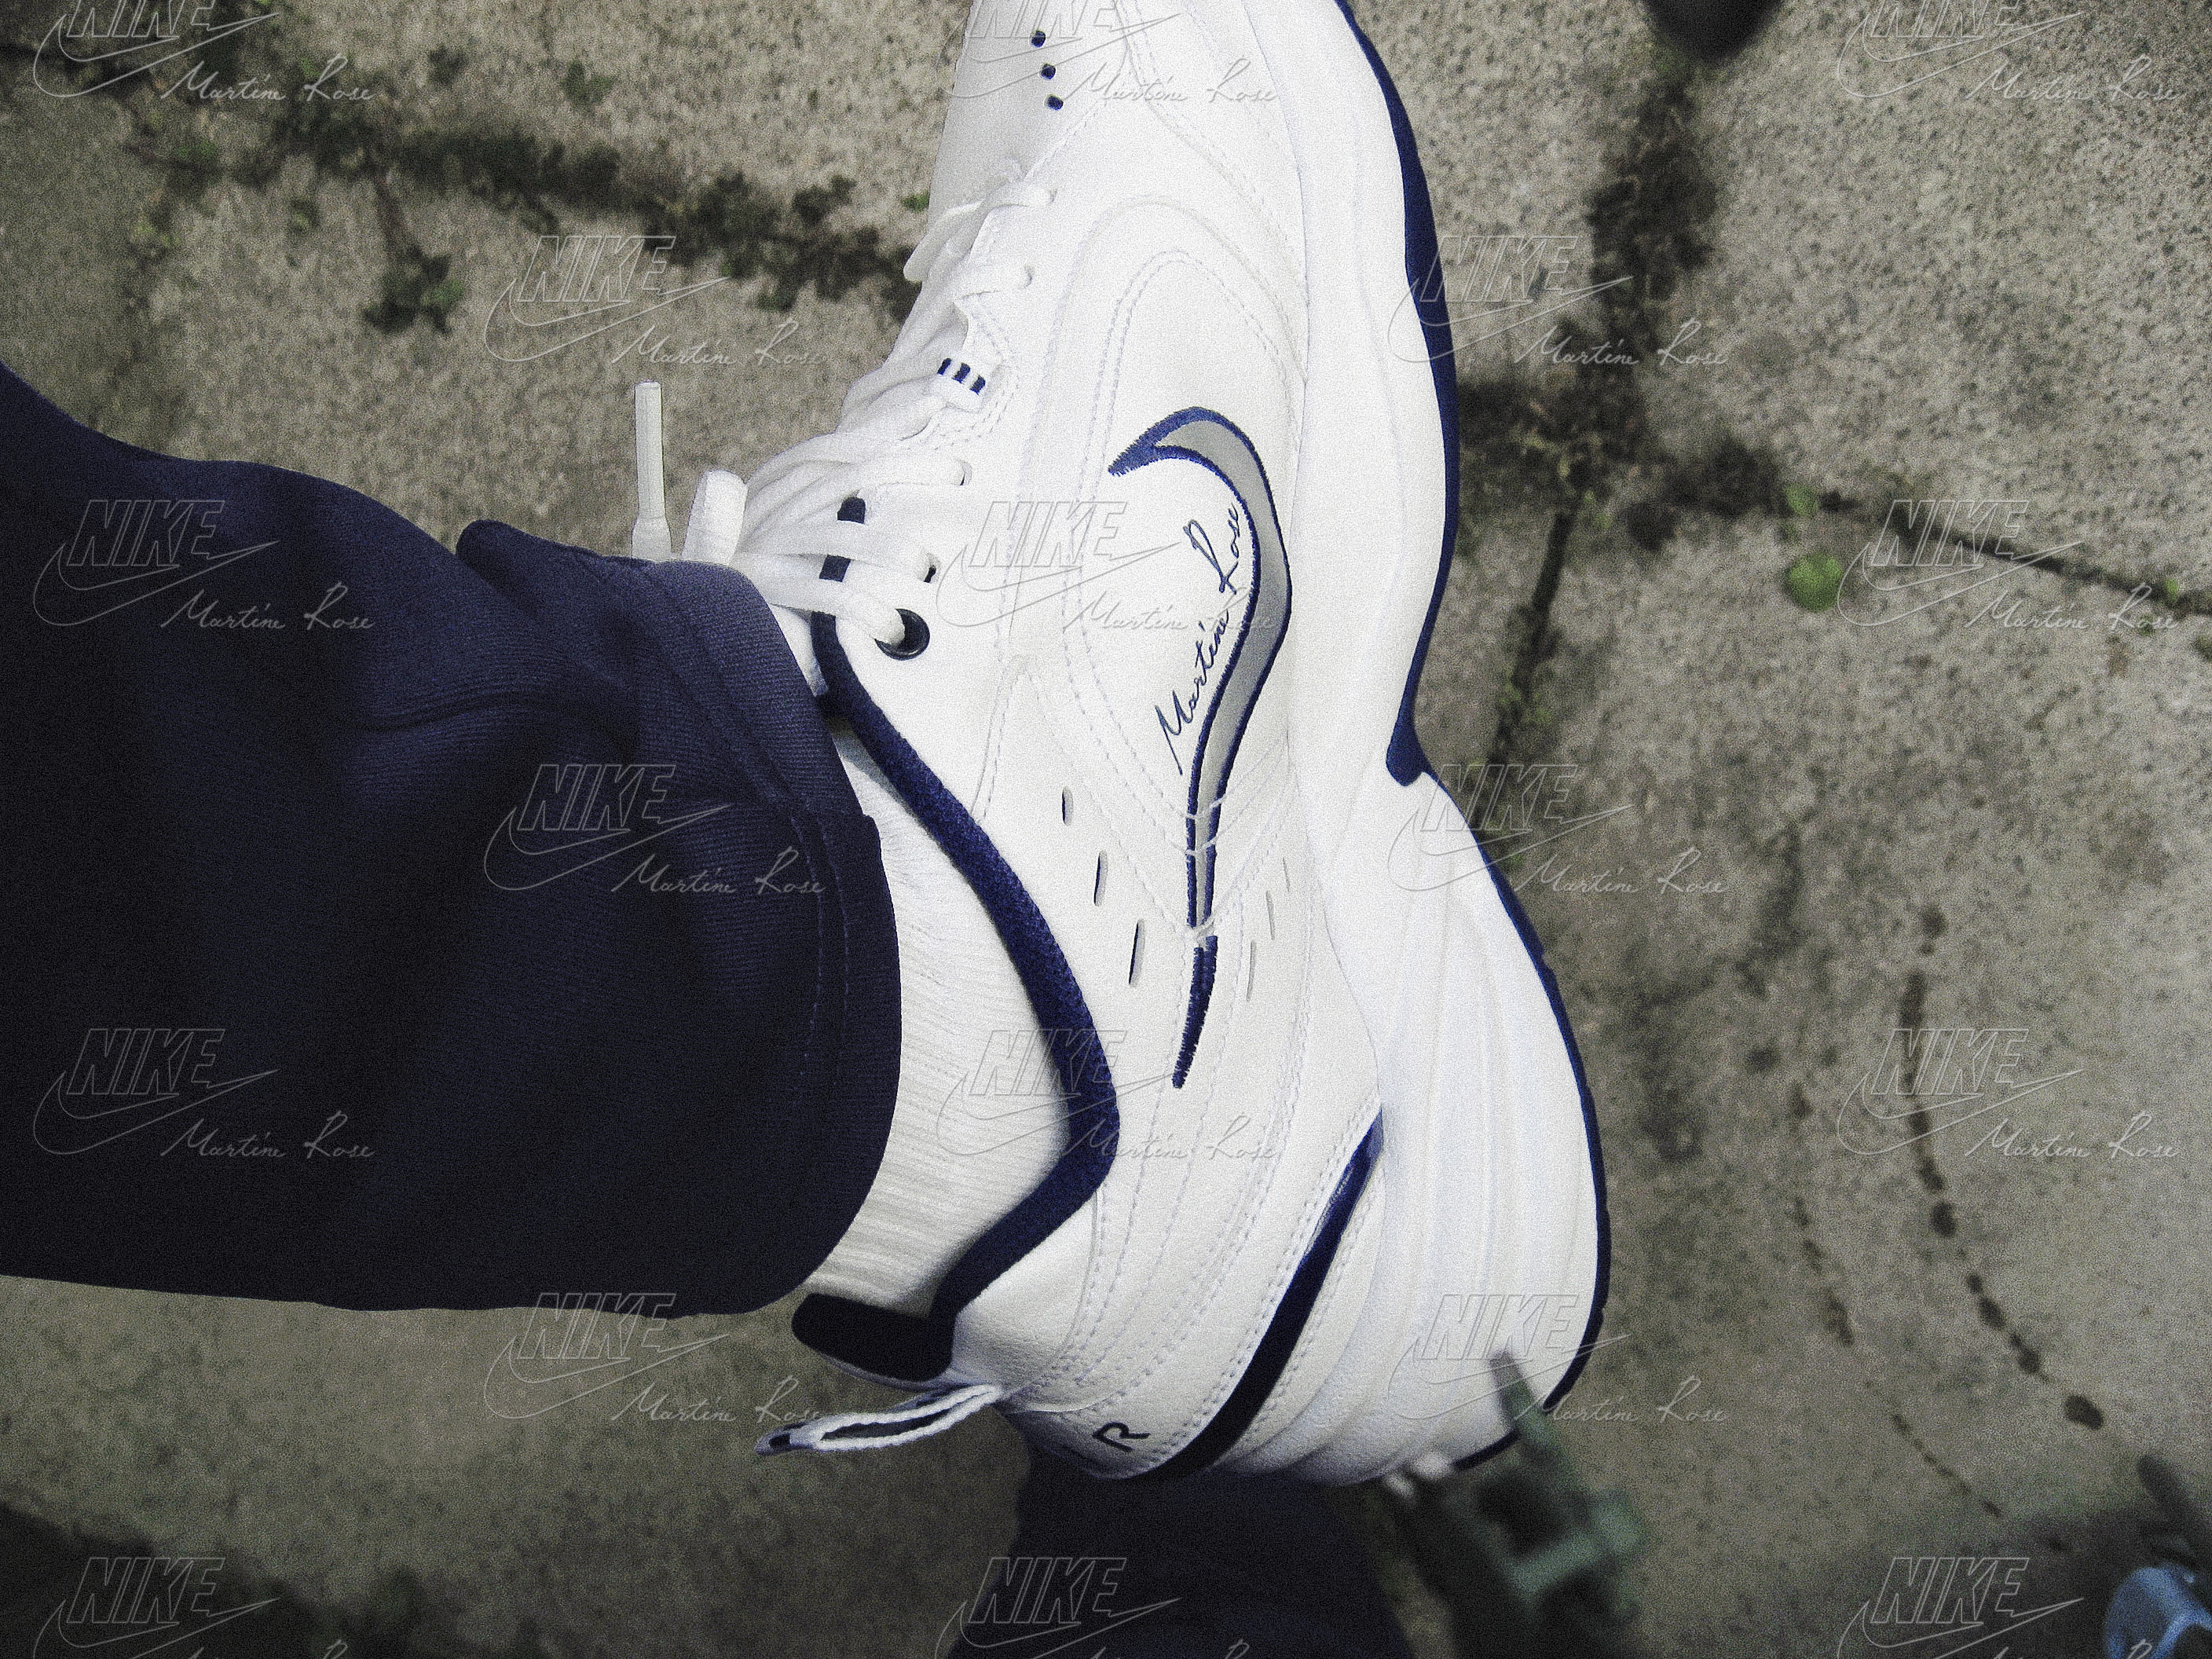 Martine Rose x Nike Air Monarch Collection 2